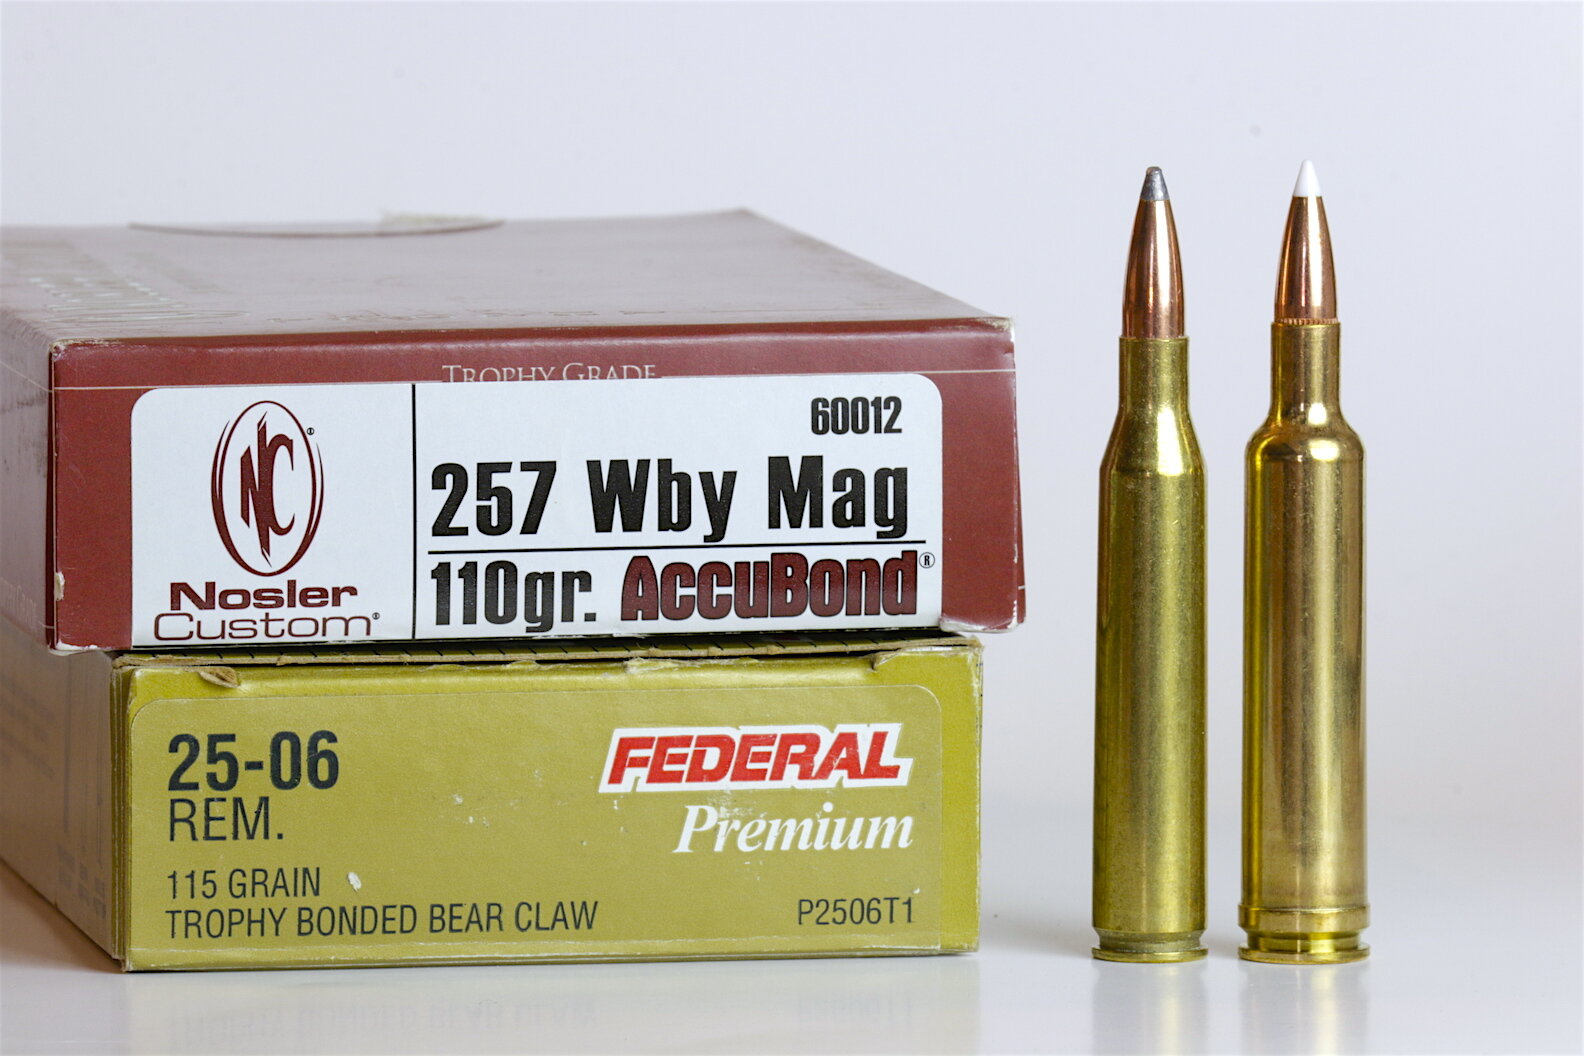 Image shows 257 Weatherby magnum and 25-06 Remington ammo. 